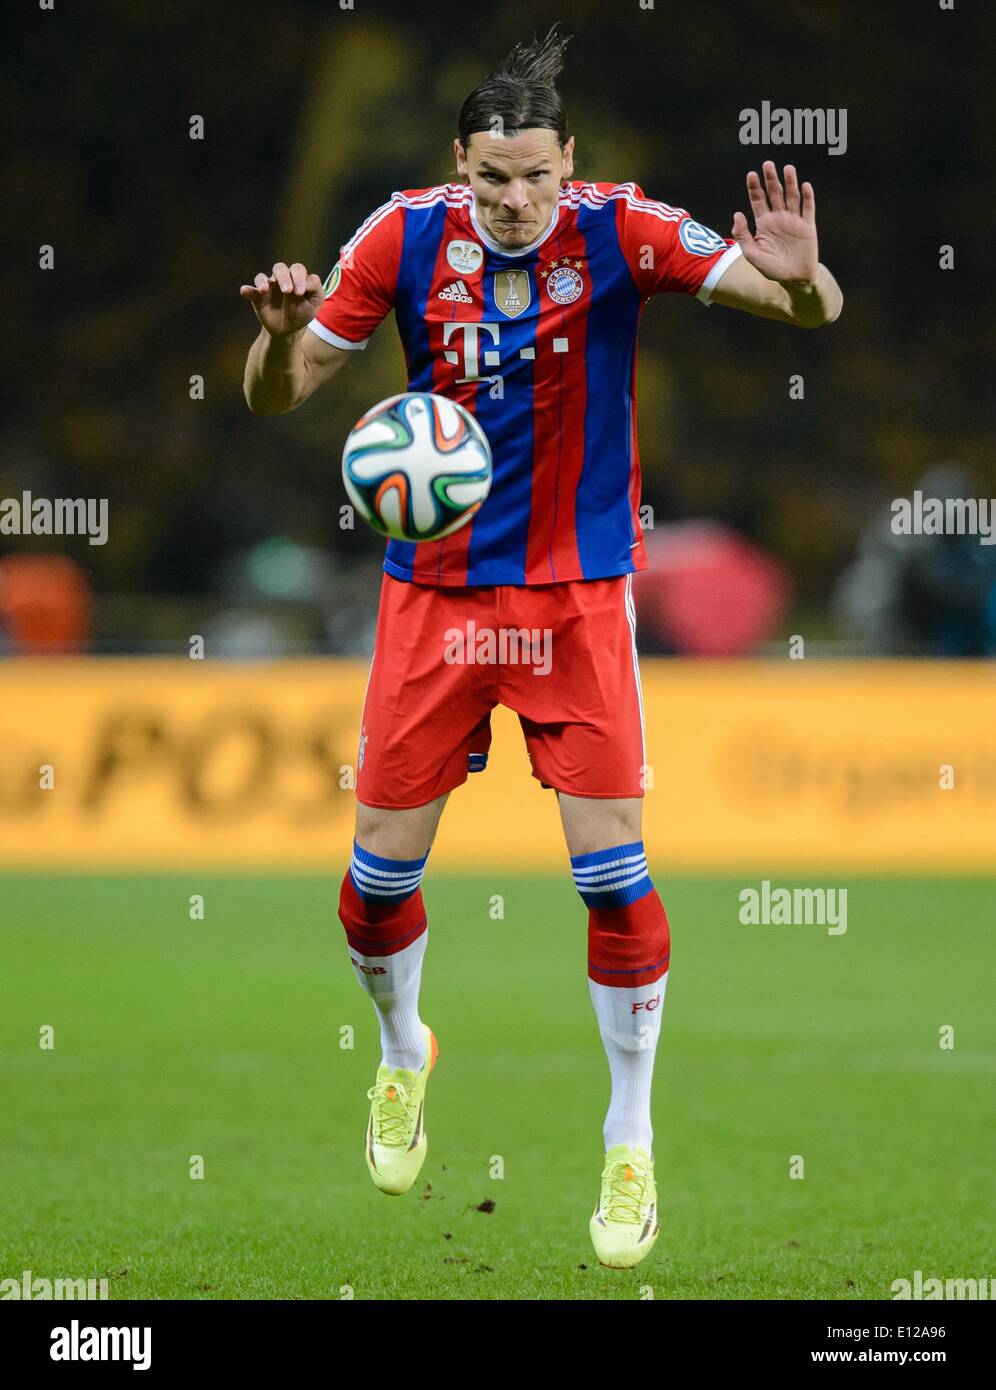 Berlin, Germany. 17th May, 2014. Dortmund's Daniel van Buyten in action during the DFB Cup final between Borussia Dortmund and FC Bayern Munich at the Olympic Stadium in Berlin, Germany, 17 May 2014. Photo: Thomas Eisenhuth/dpa/Alamy Live News Stock Photo